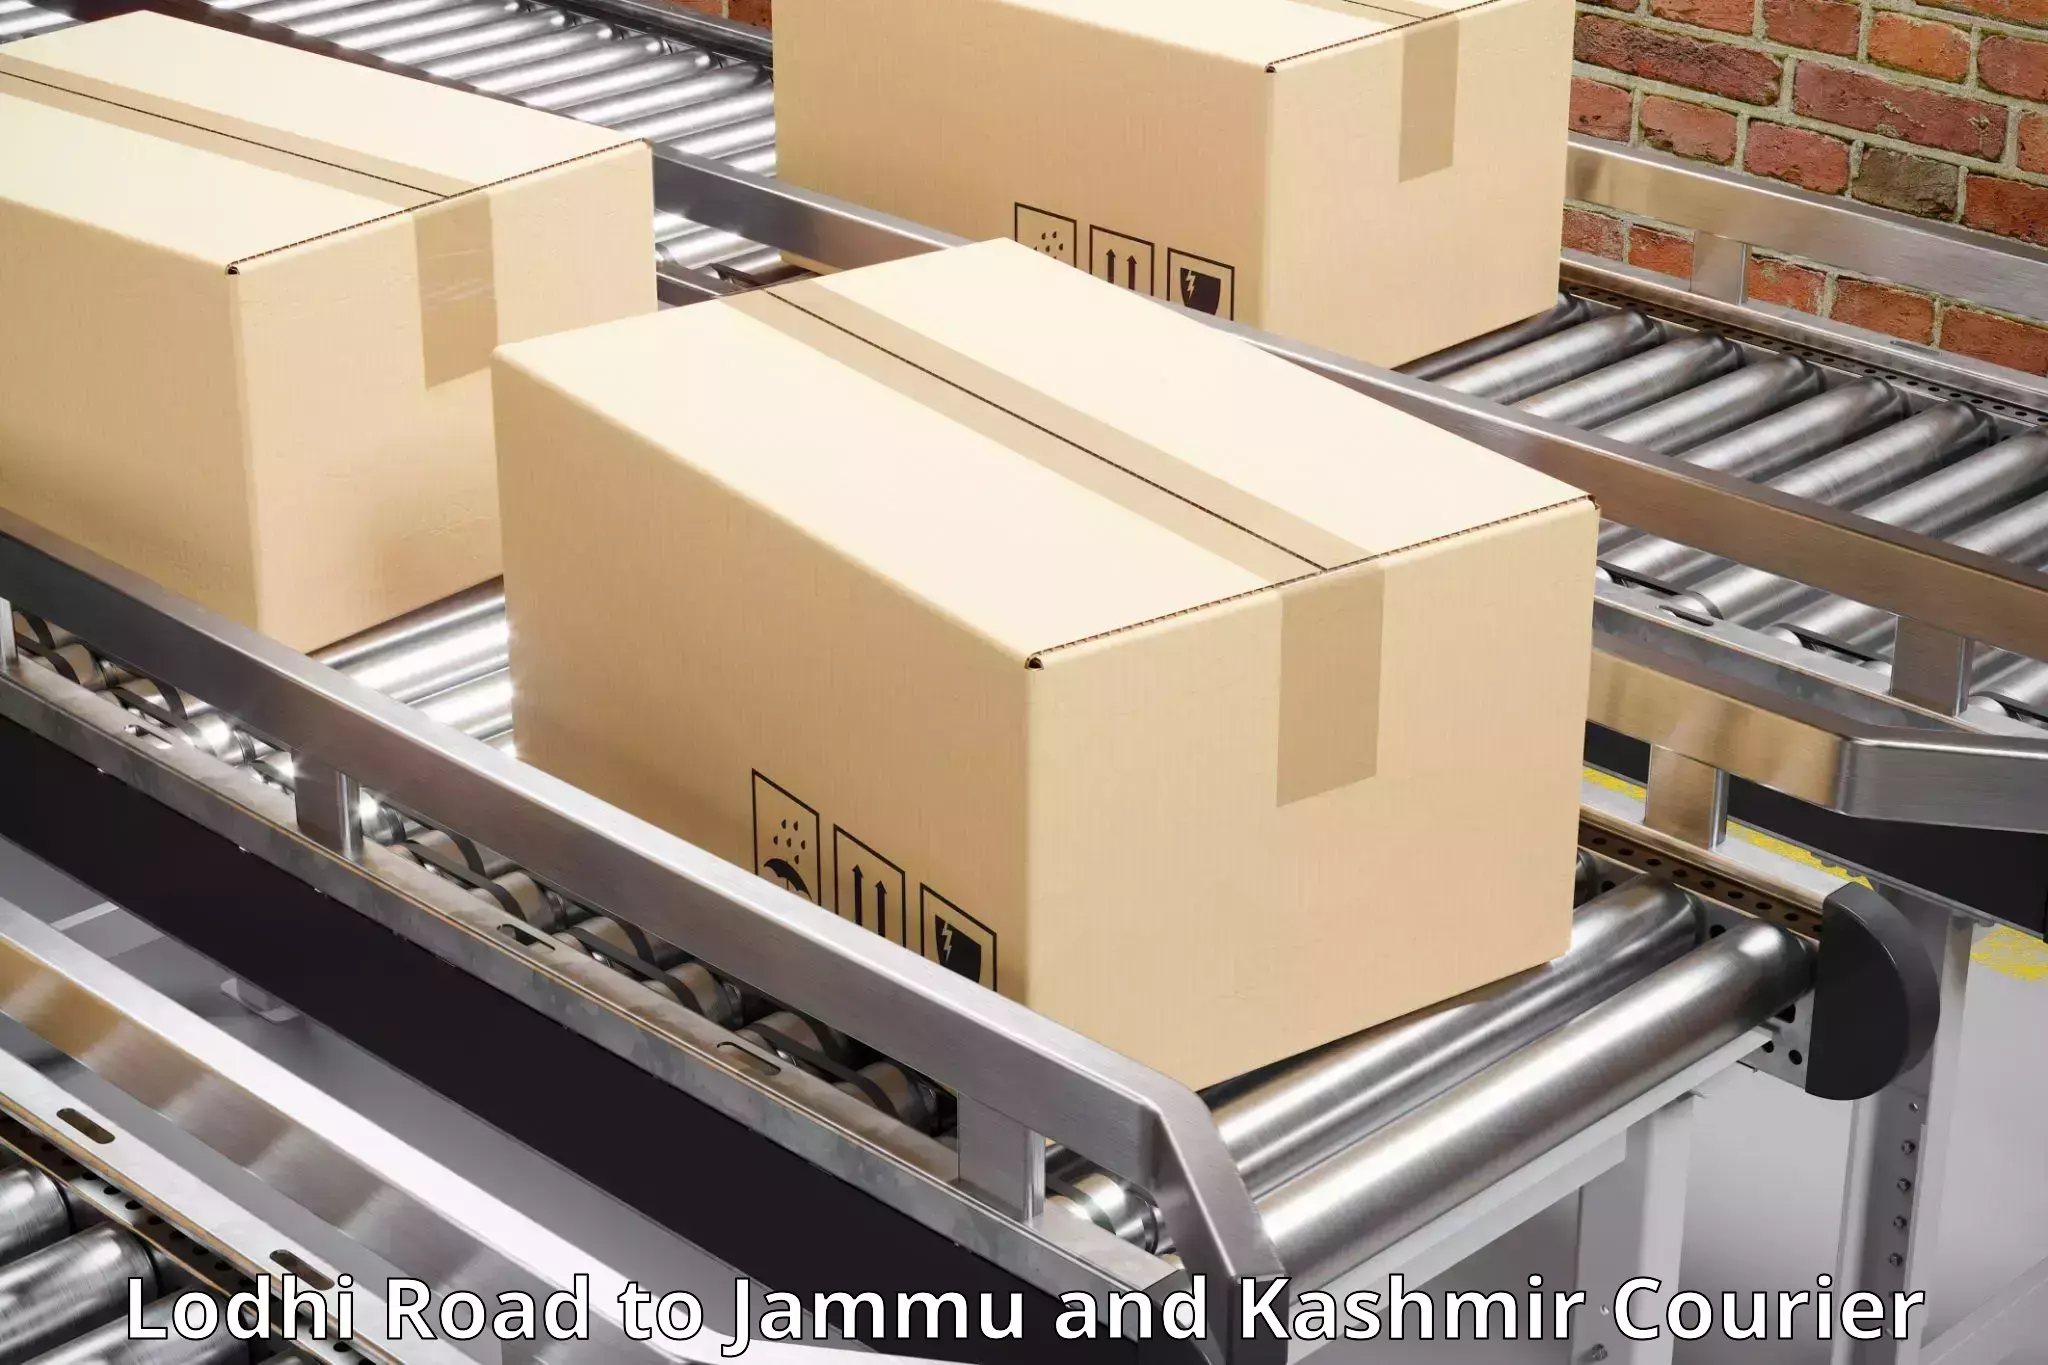 Urgent courier needs Lodhi Road to Jammu and Kashmir